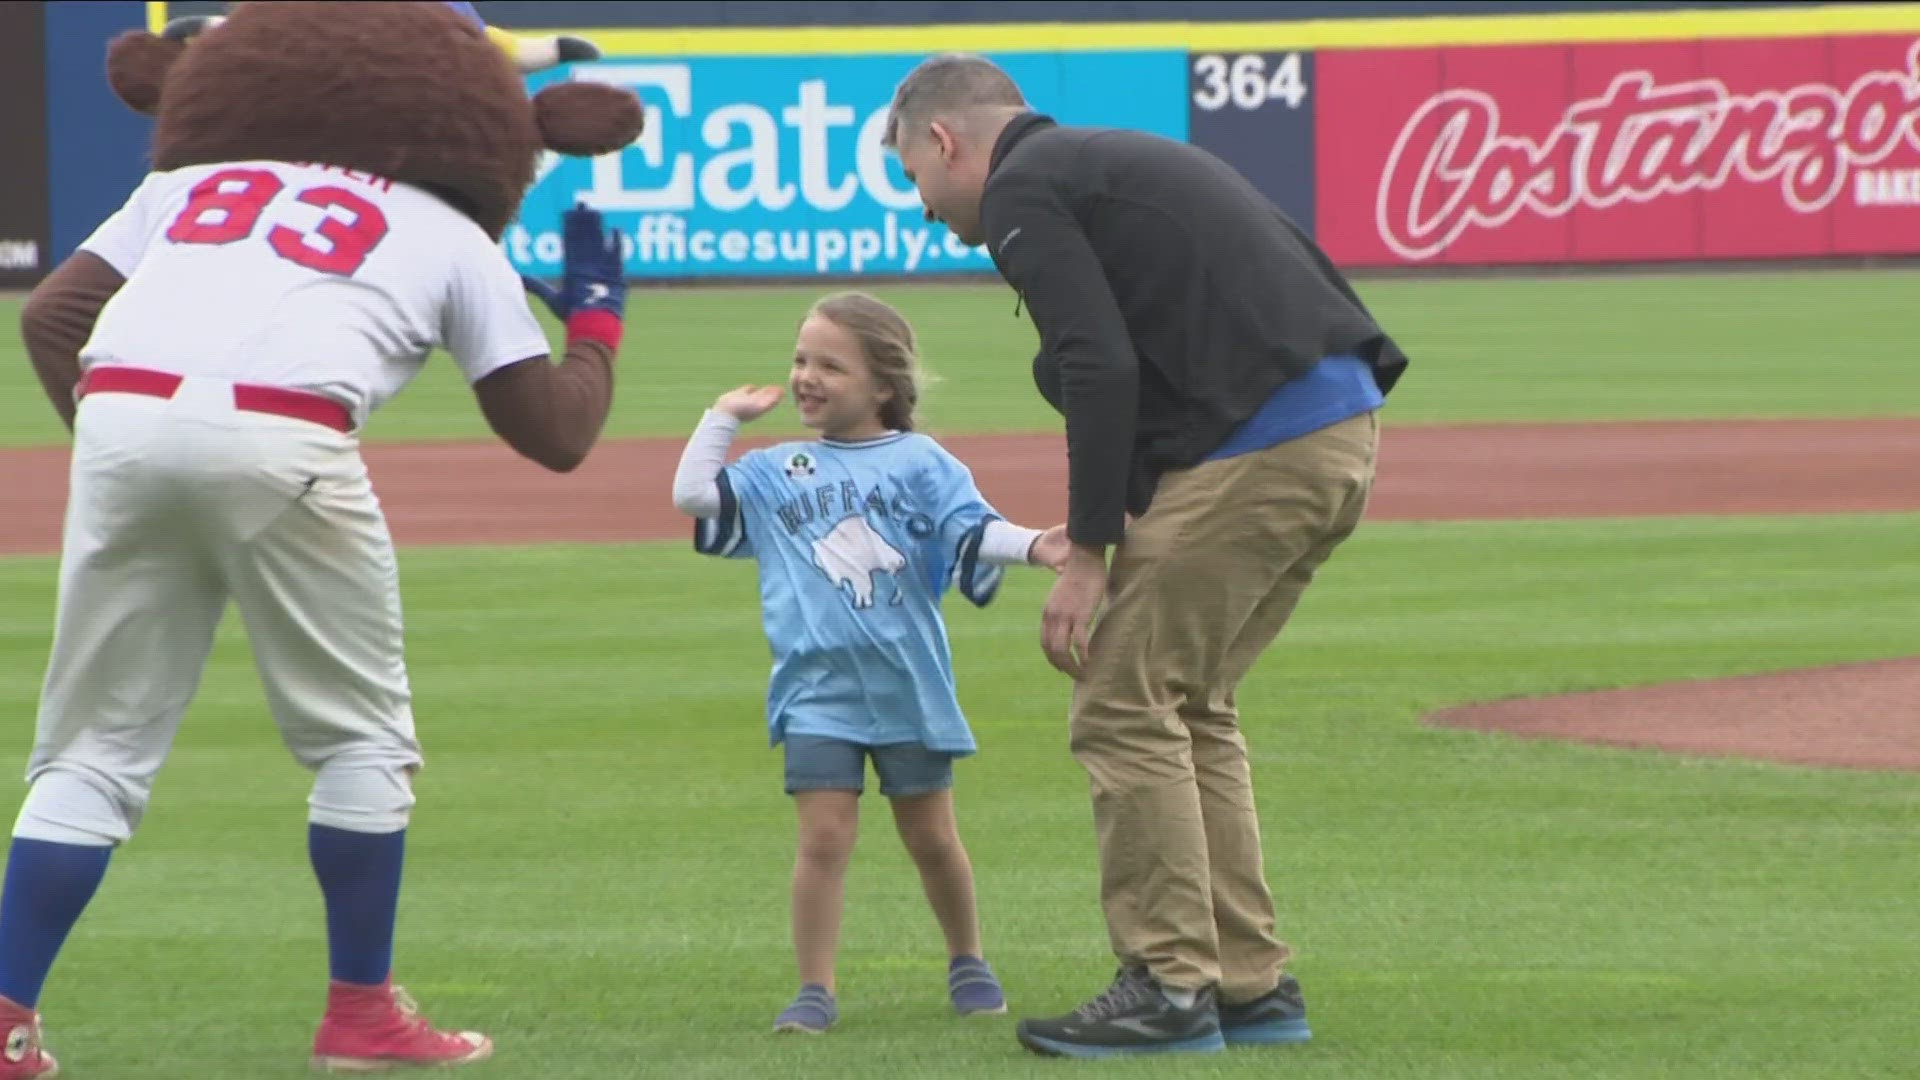 Four-year-old Olivia Arno threw out the first pitch at the Bison's game Saturday.